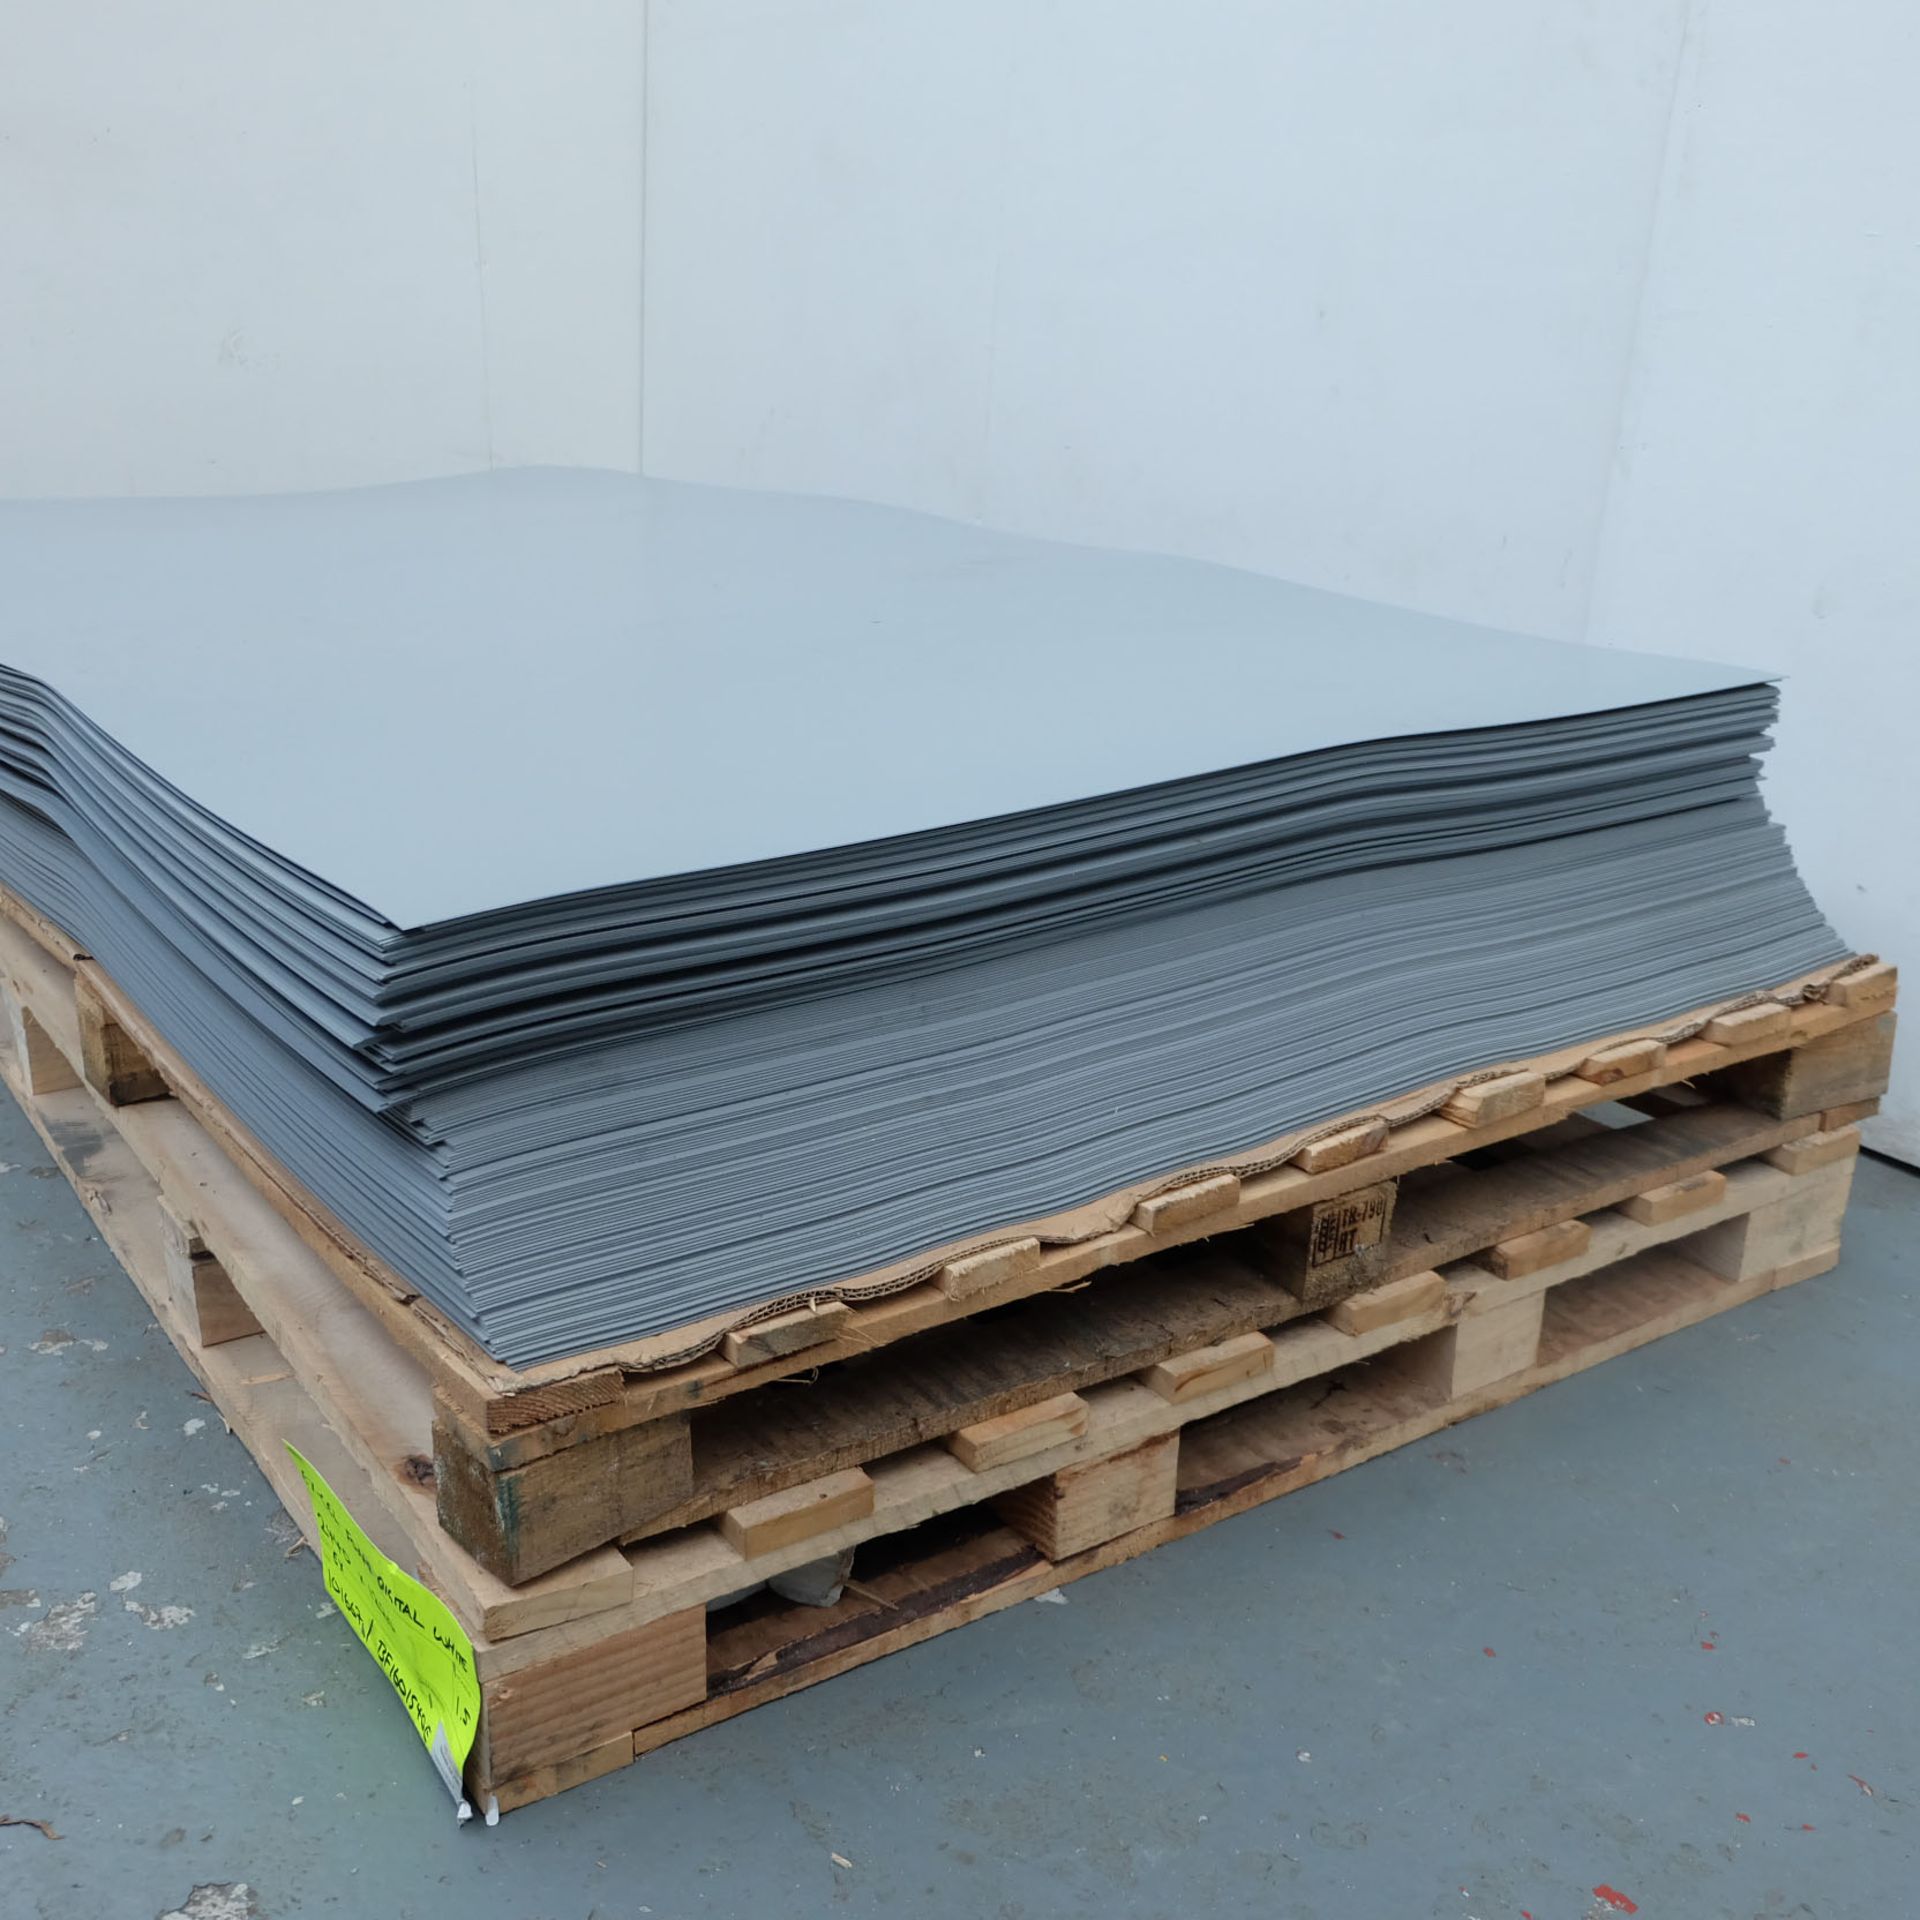 19 1/2 Sheets of Galvanised Steel. Size: 2500mm x 1250mm. - Image 2 of 4